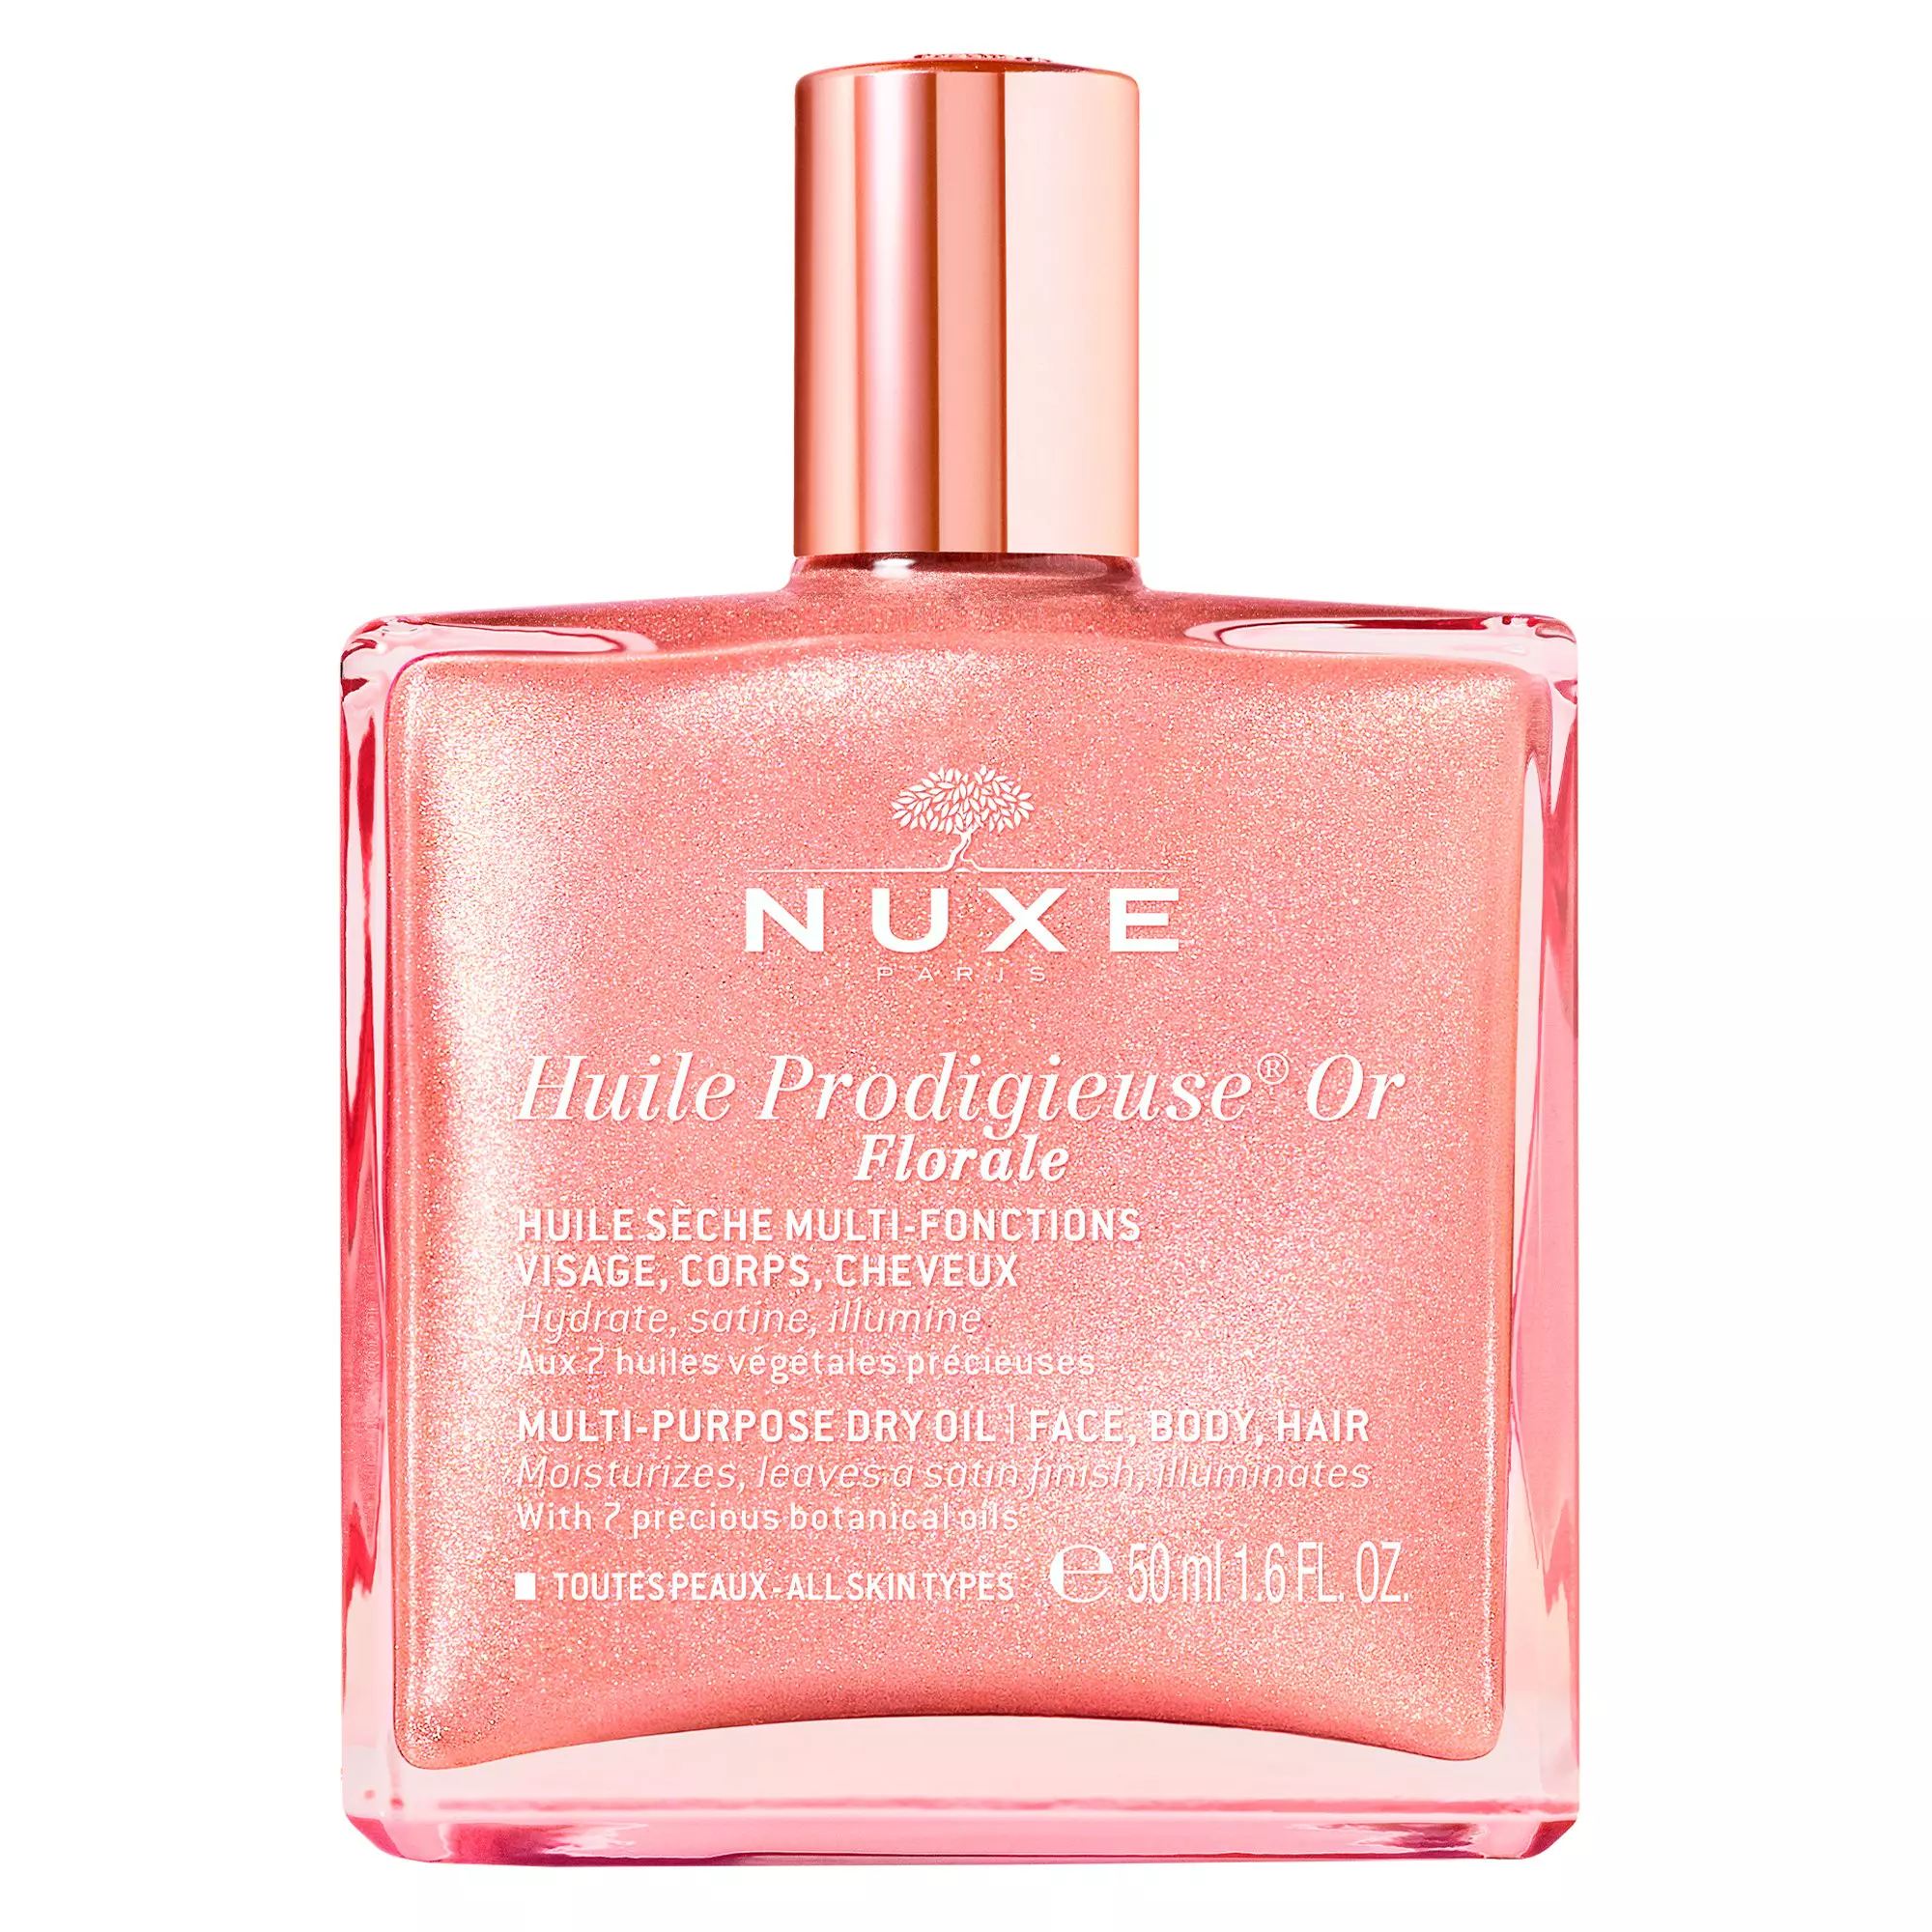 Nuxe Huile Prodigieuse Or Florale Ml